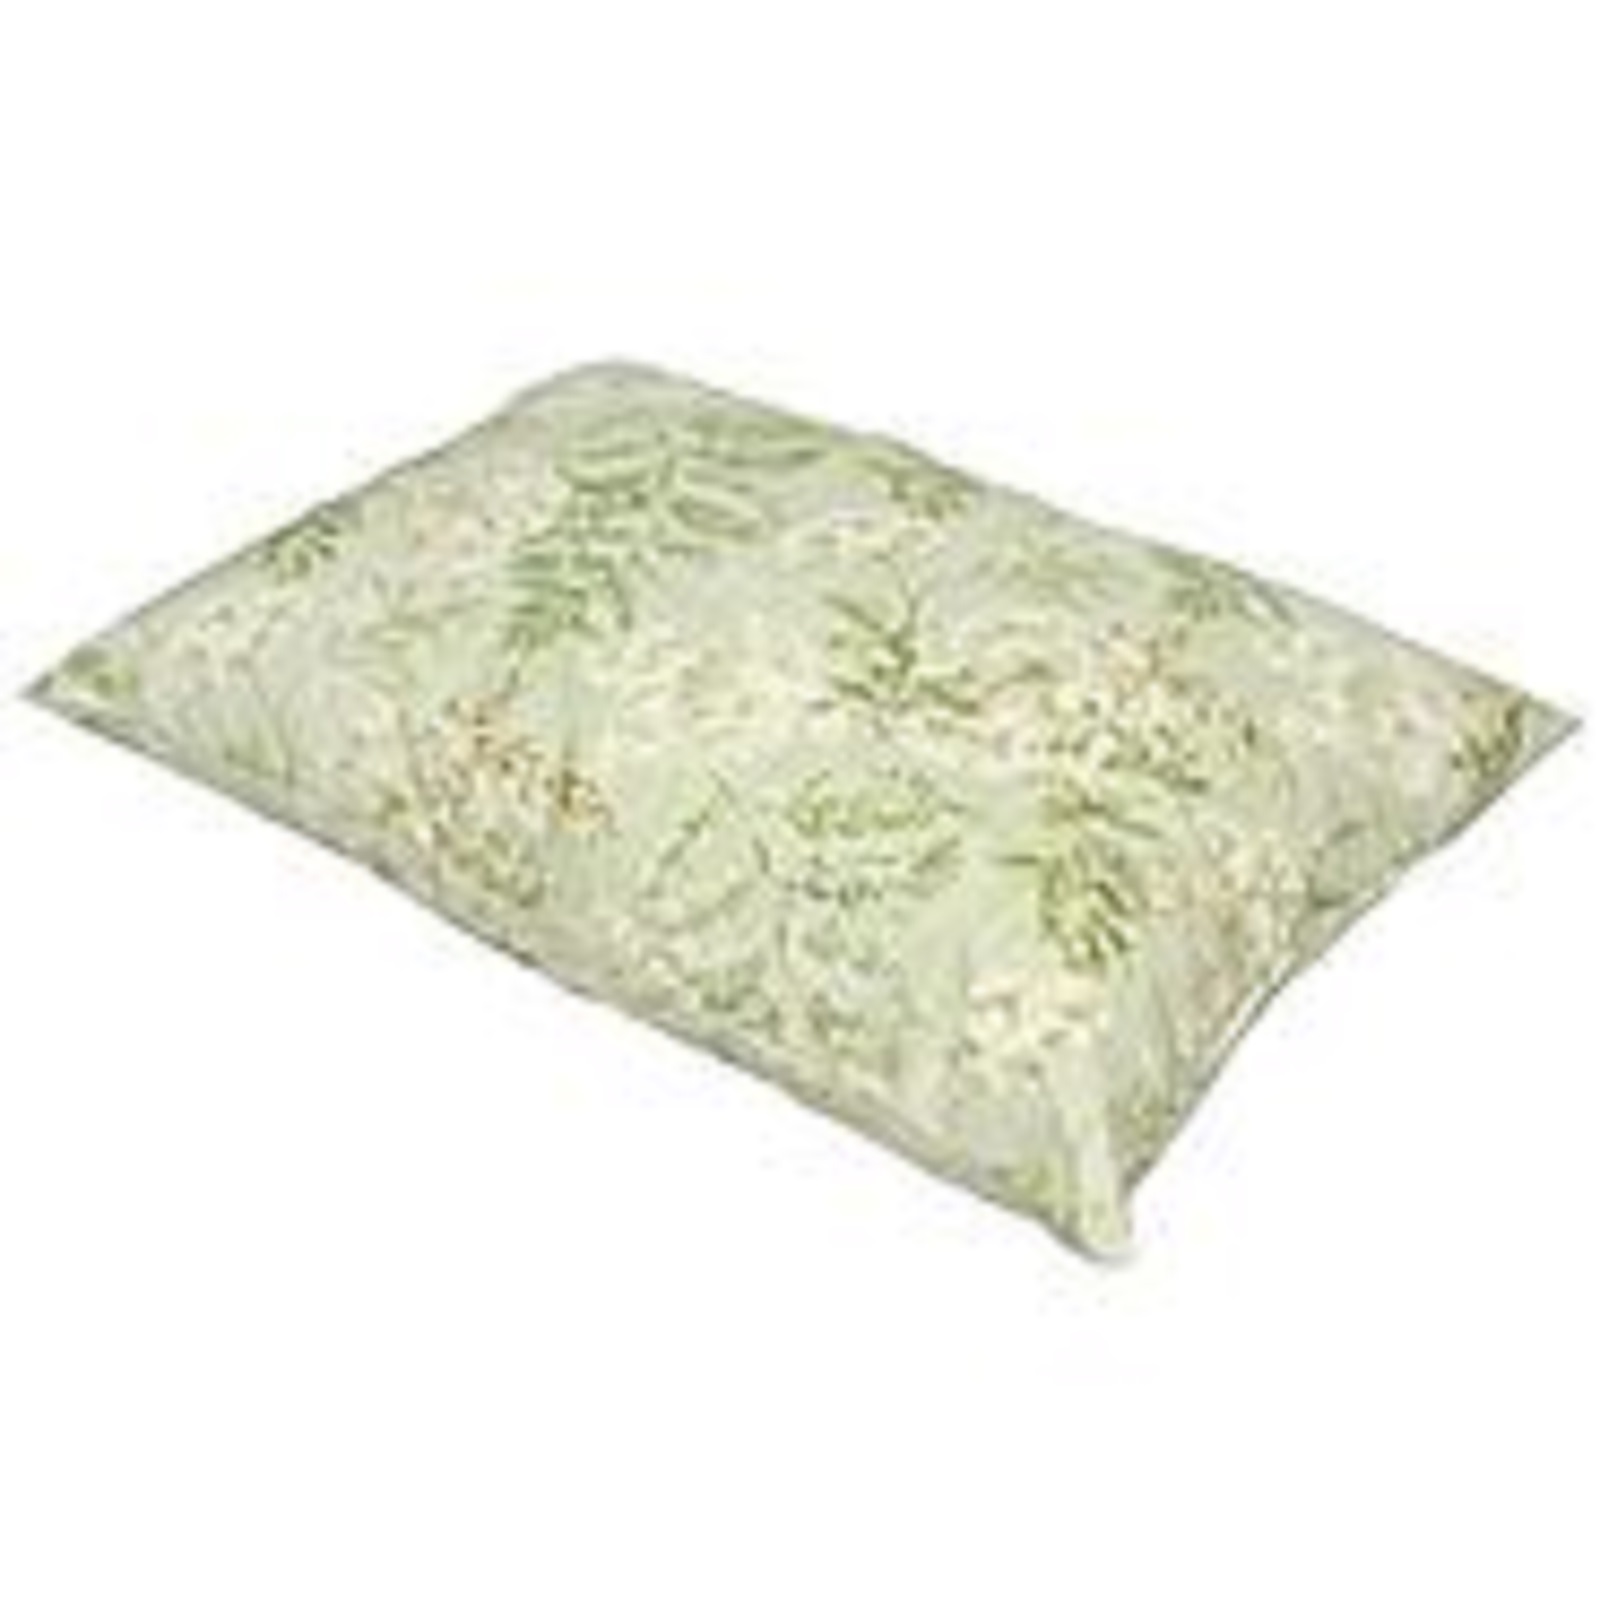 Happy Hounds Bandit Dog Bed - Small(24  x 36") - Aggie floral print